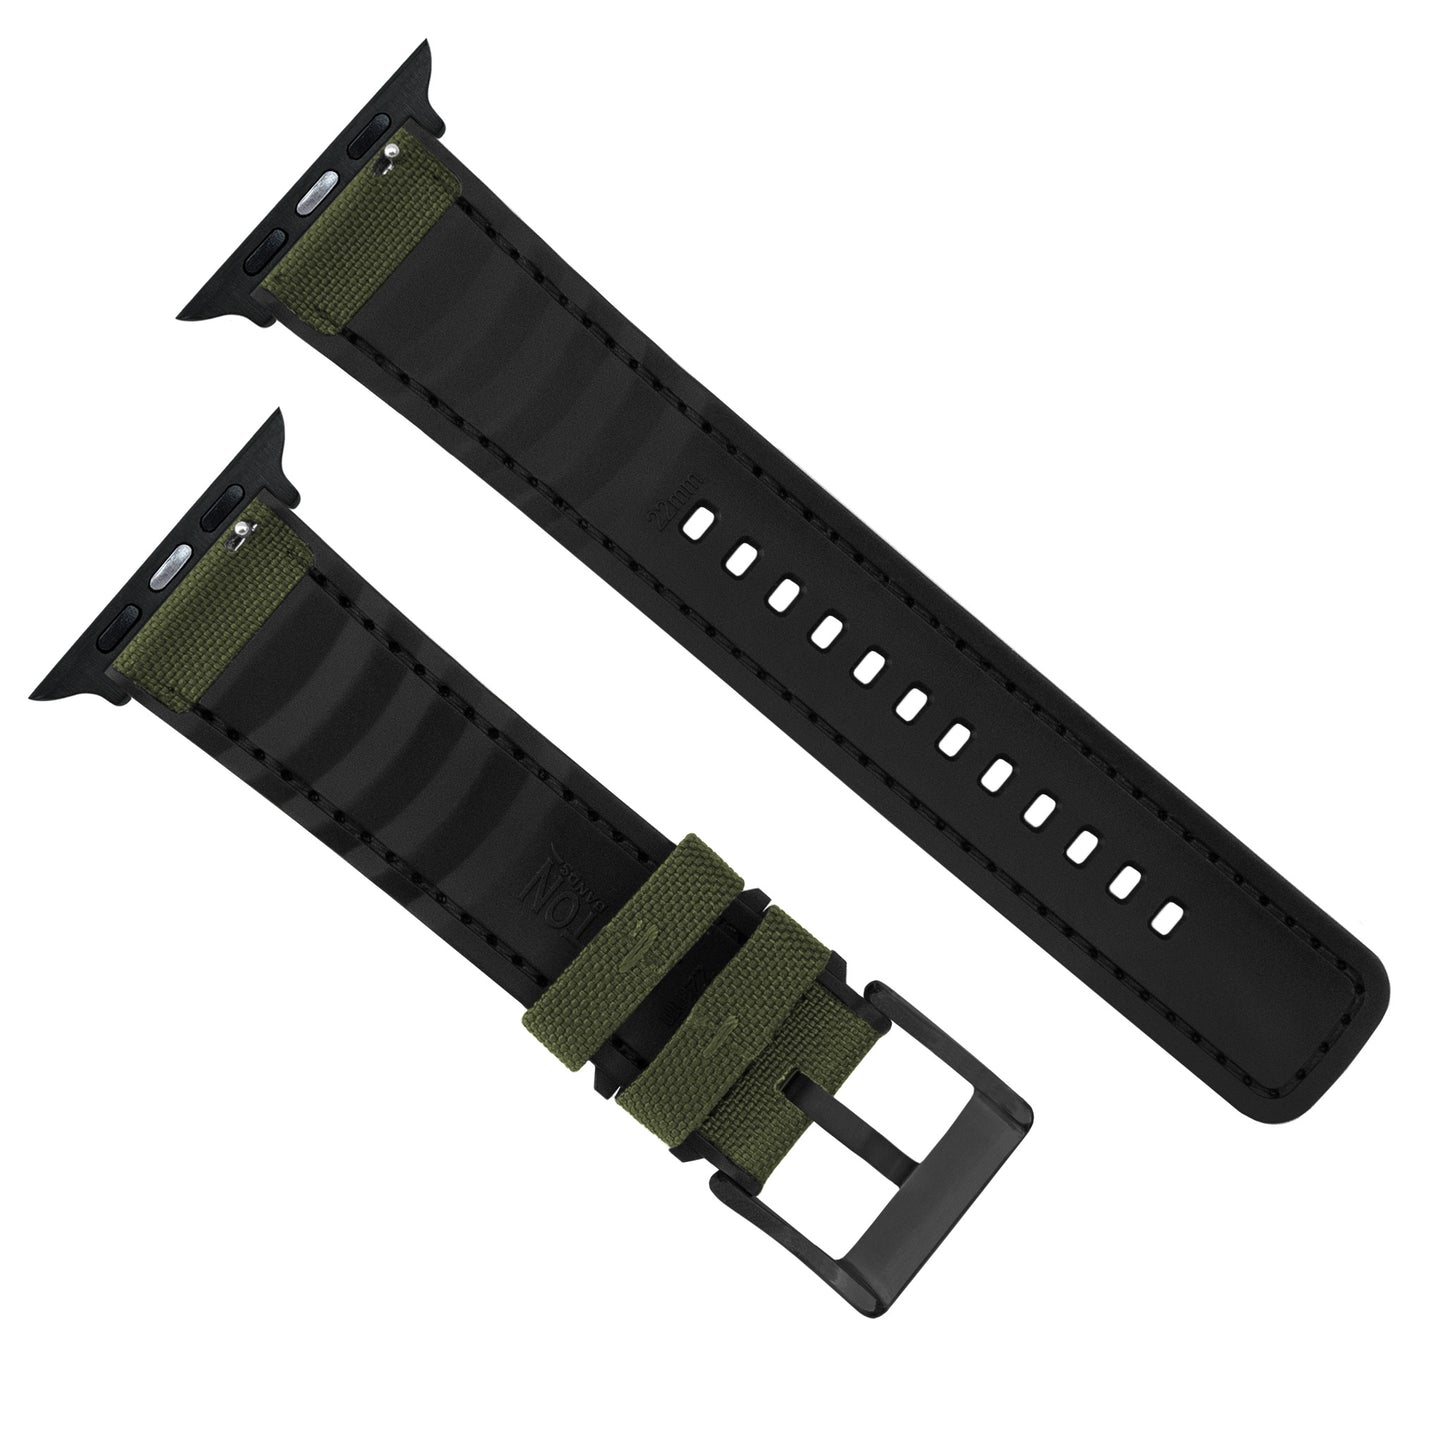 Apple Watch | Army Green Cordura Fabric and Silicone Hybrid - Barton Watch Bands